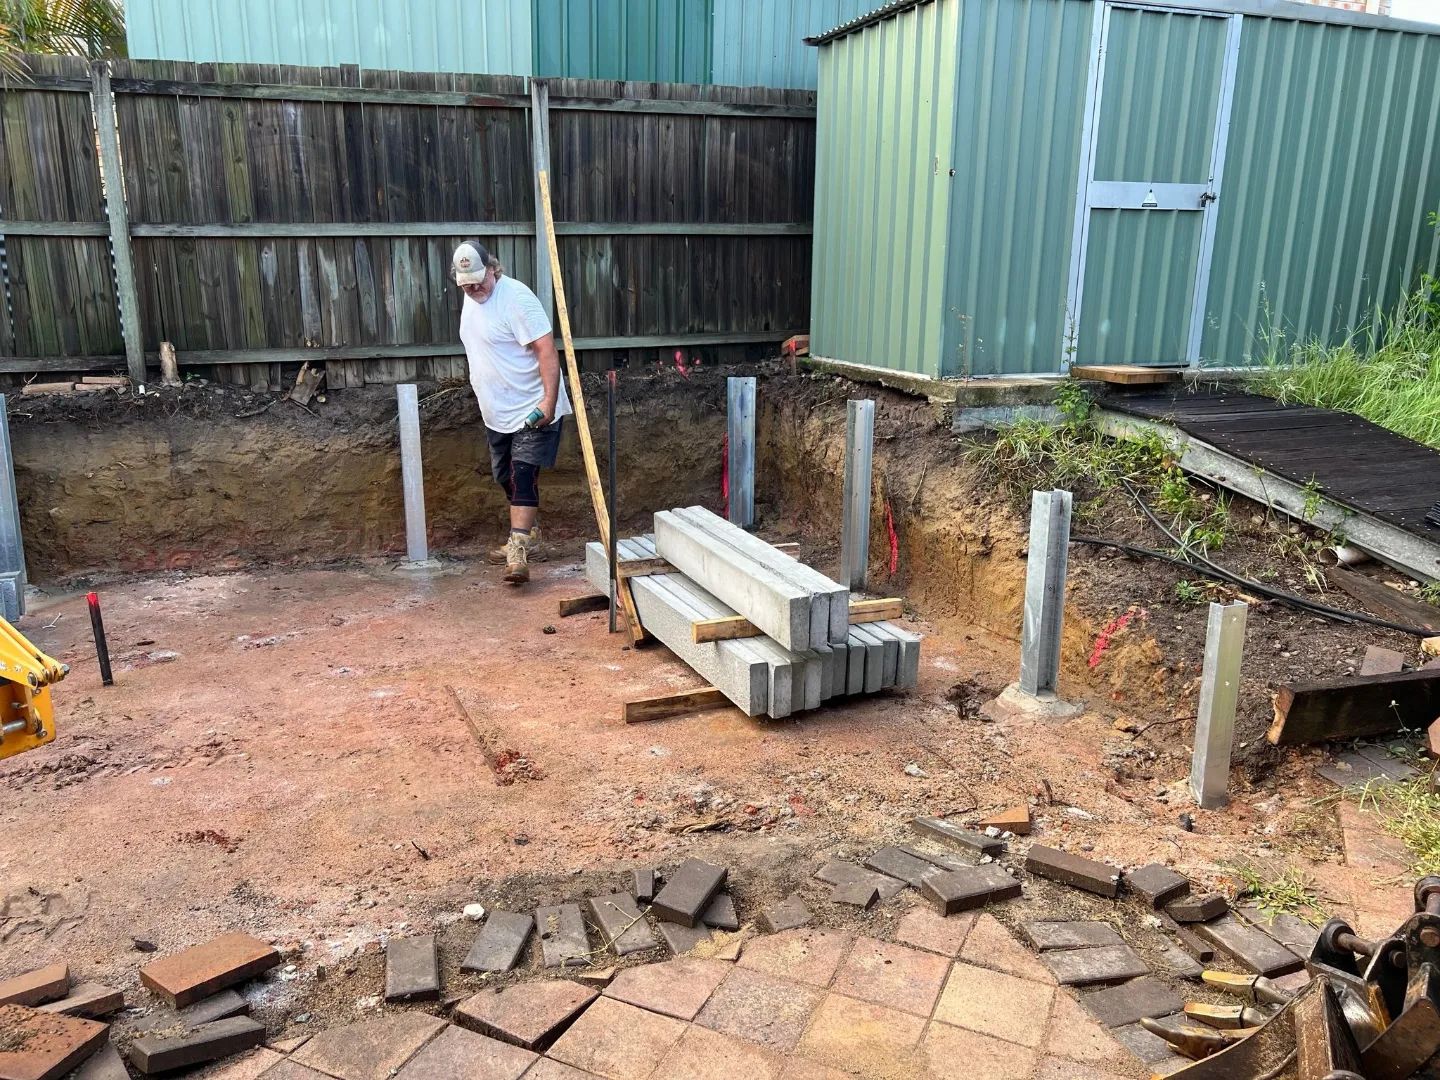 Large dig-out, concrete retaining wall and colourbond fencing